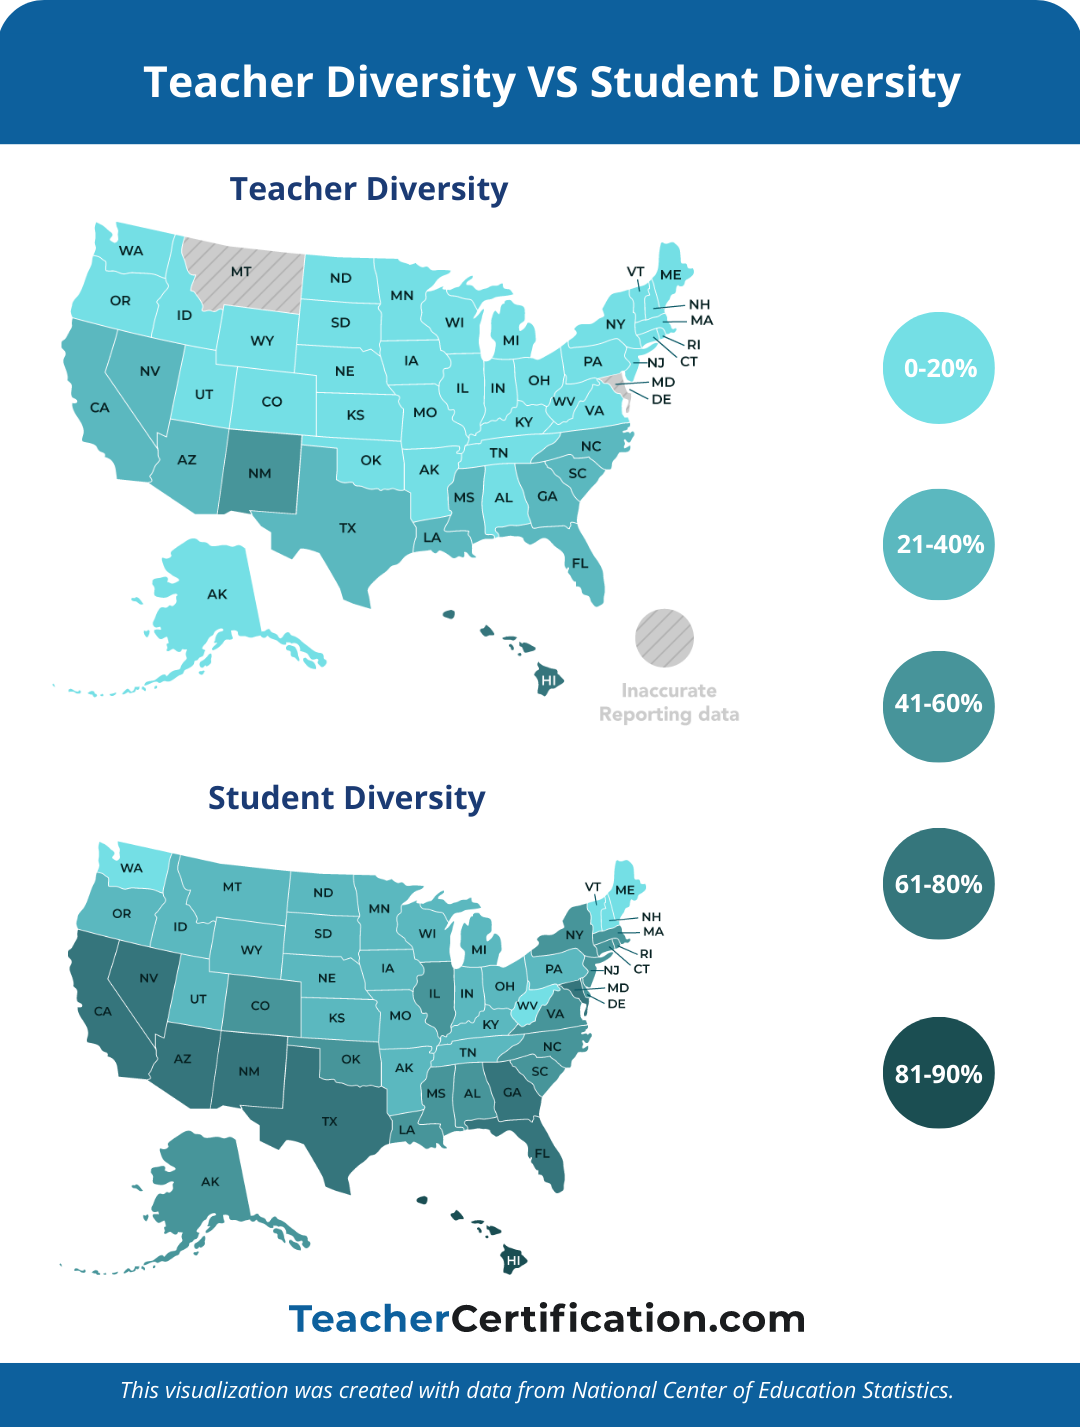 A pair of maps showing states shaded in different colors based on their percentages of teachers of color and students of color.